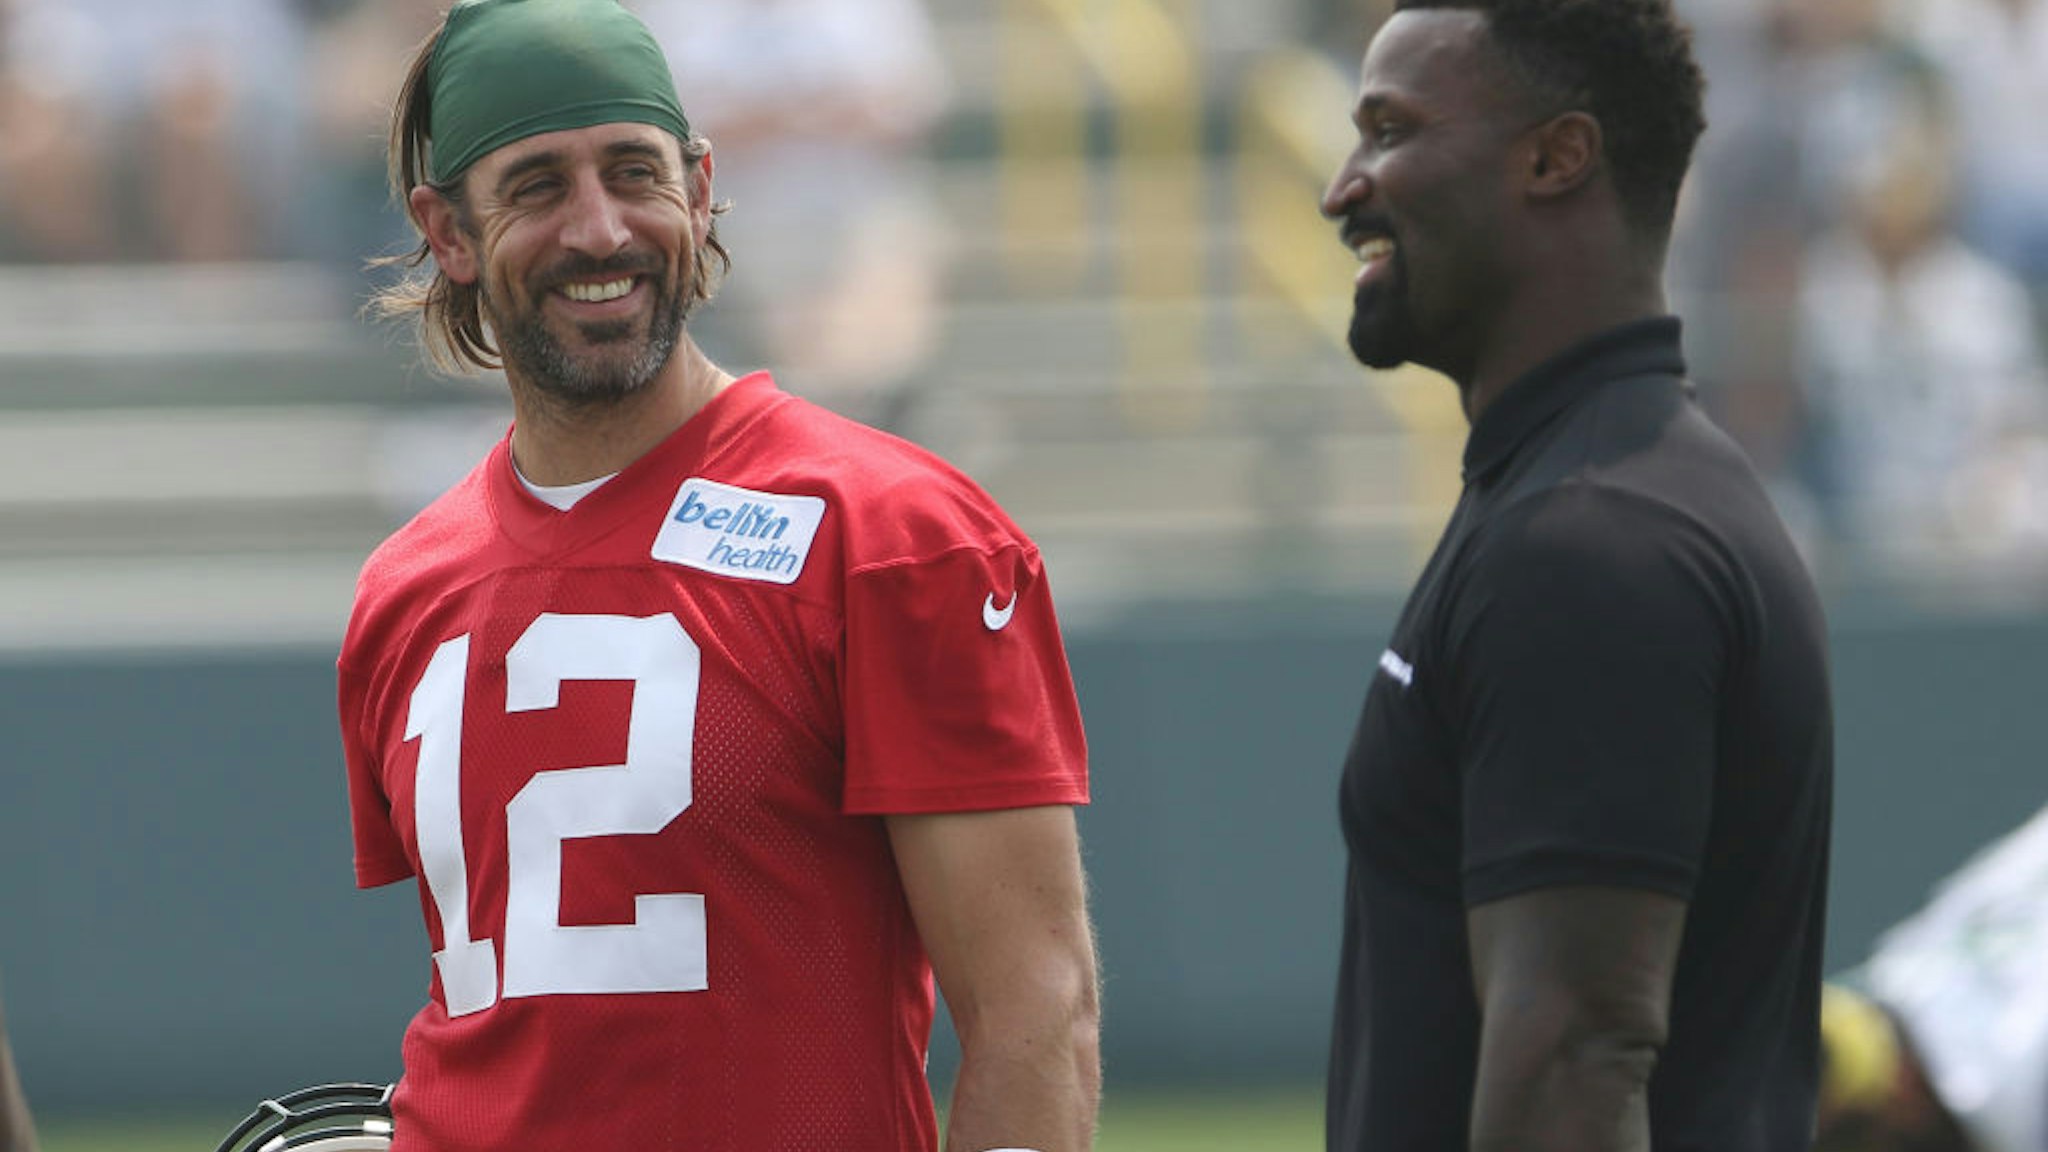 ASHWAUBENON, WI - JULY 31: Green Bay Packers quarterback Aaron Rodgers (12) talks with NFL Network host James Jones during 2021 Training Camp at Ray Nitschke Field on July 31, 2021 in Ashwaubenon, WI. (Photo by Larry Radloff/Icon Sportswire via Getty Images)